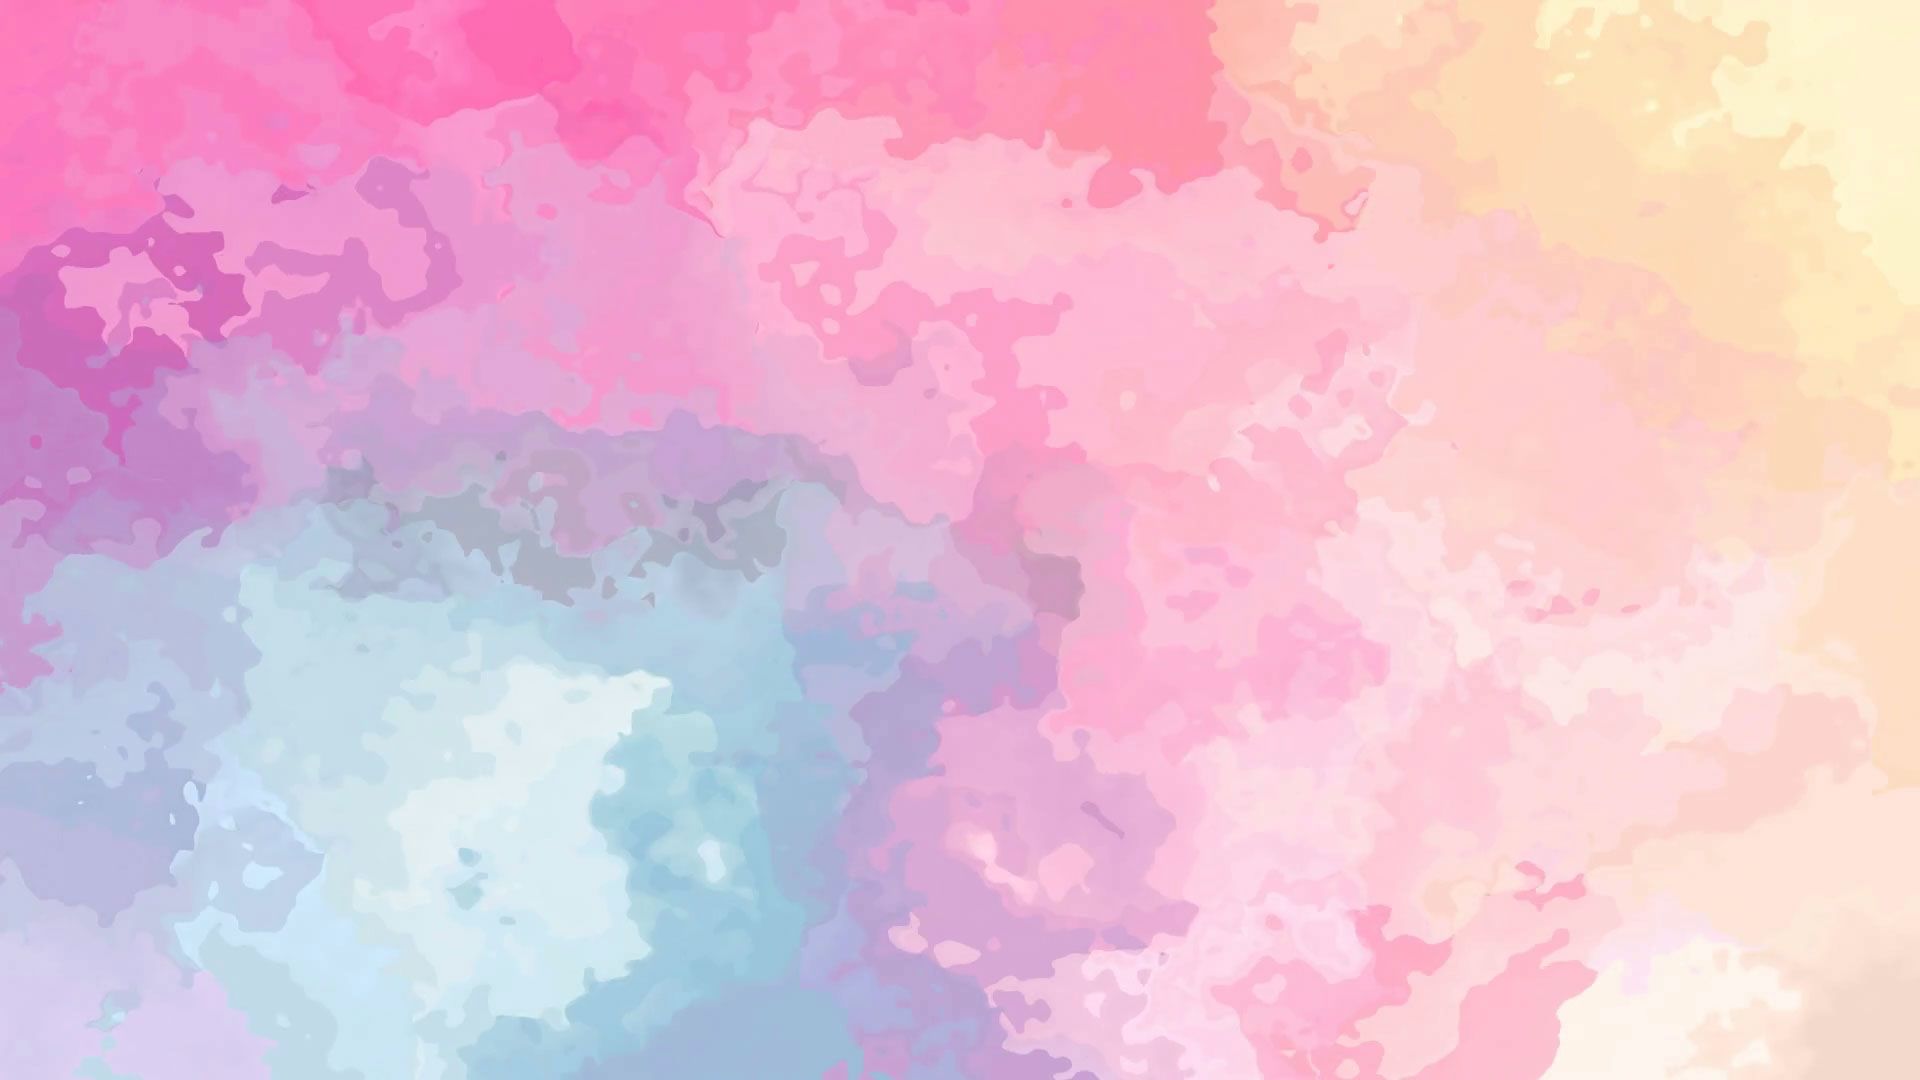 Pastel Background Goo Pastel Background Textures And 2048 Pixels Wide 1152 Pixels Tall HD Wallpaper